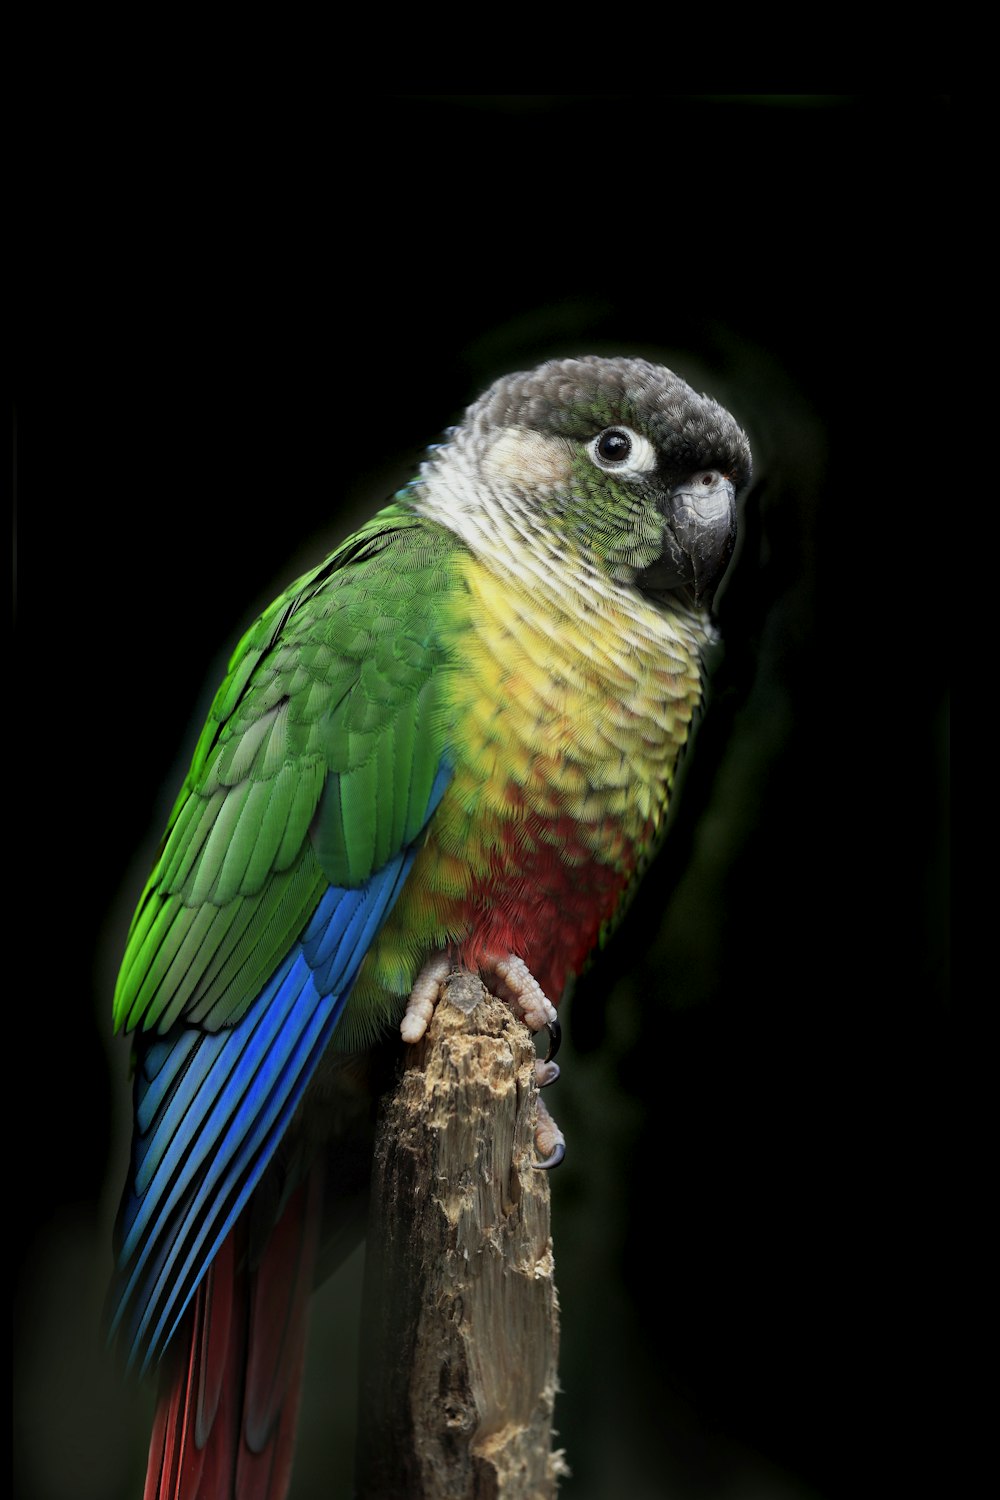 a colorful bird perched on top of a wooden stick